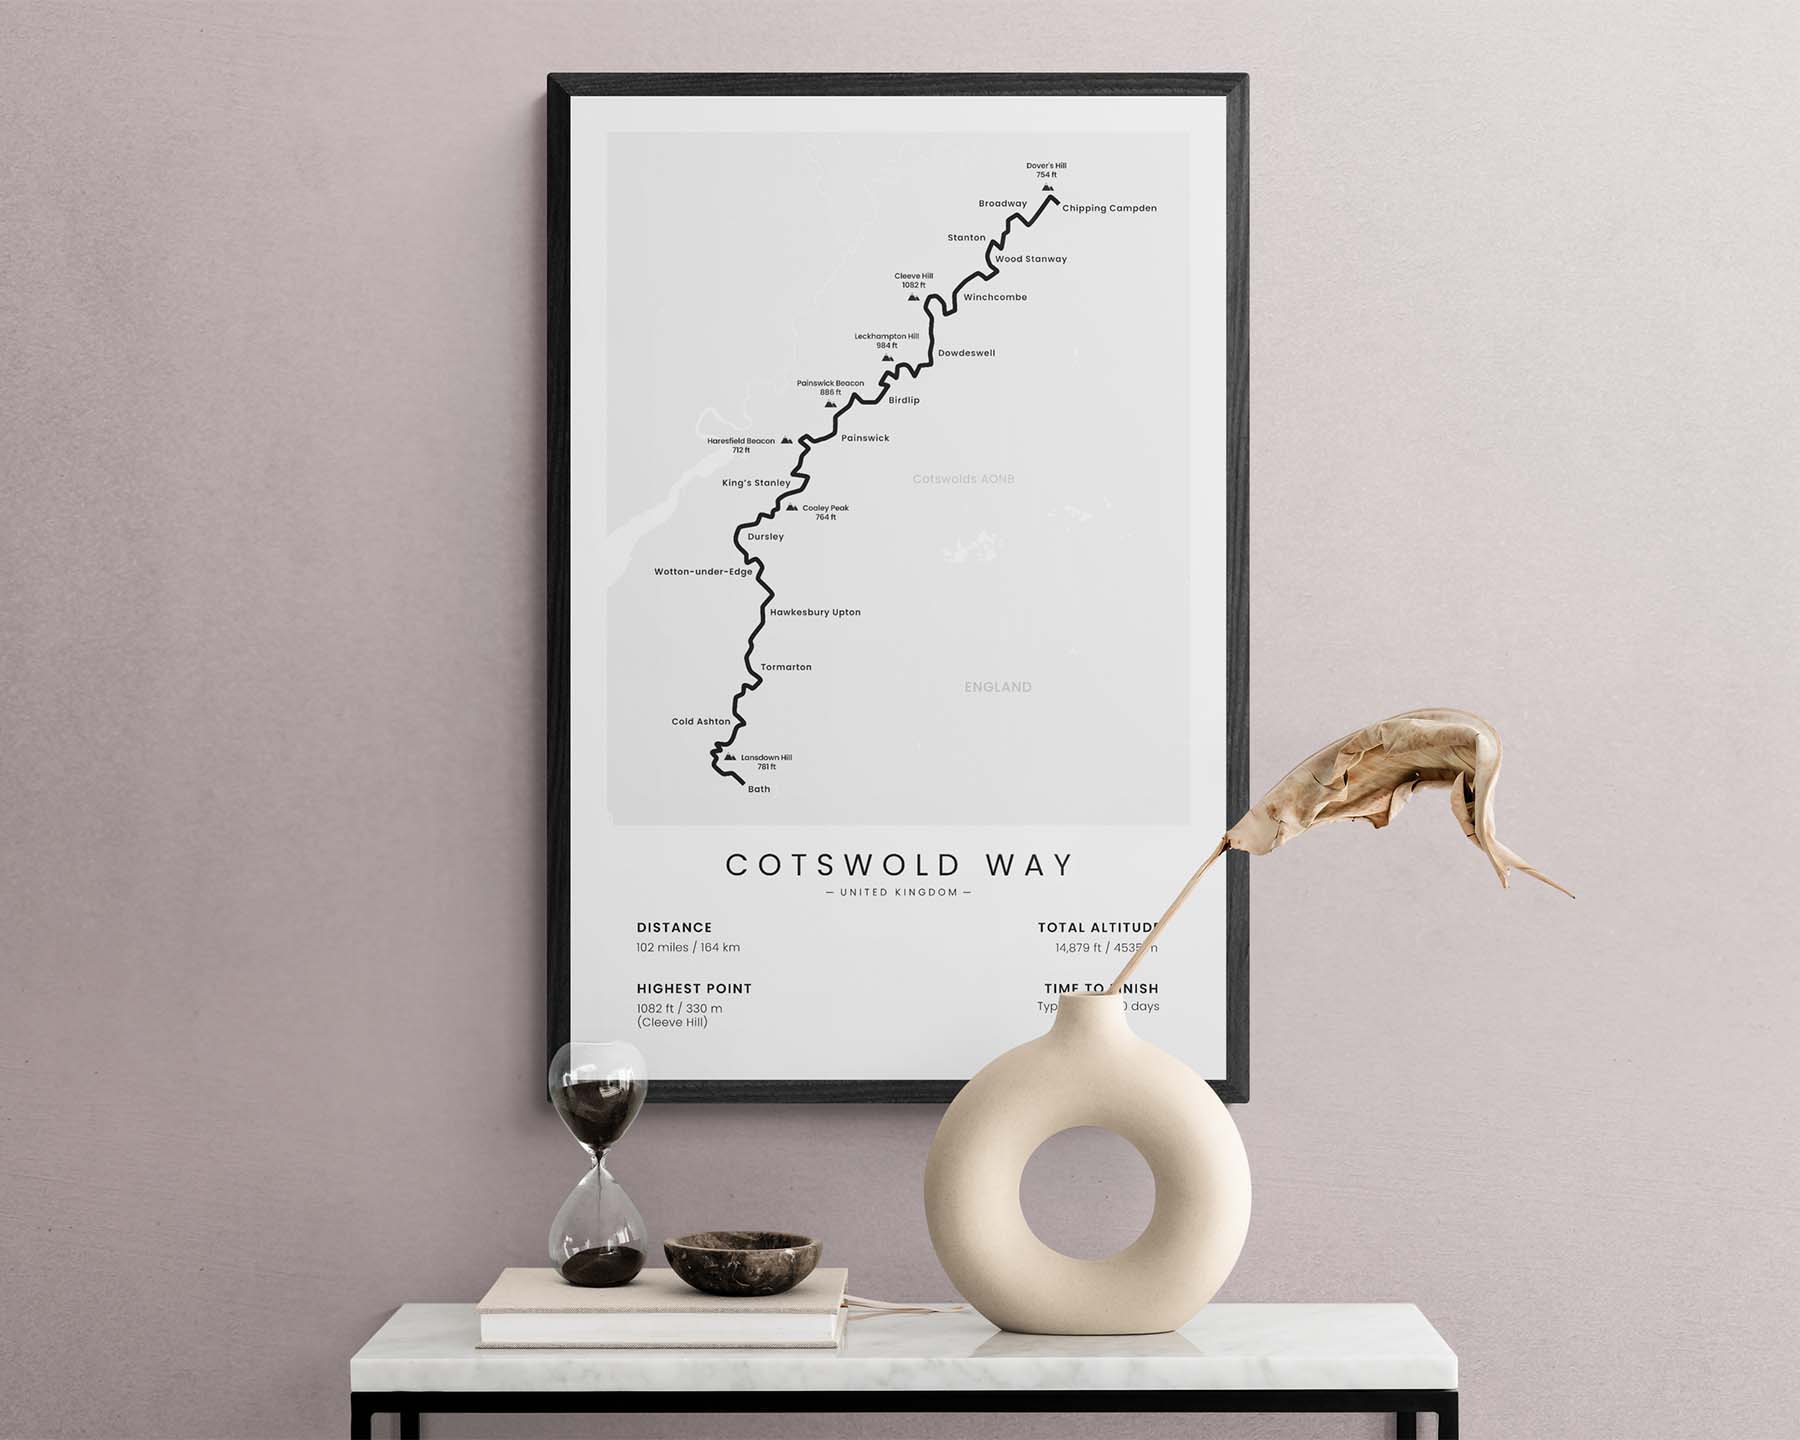 Cotswold Way (United Kingdom, Cotswolds AONB, Chipping Campden to Bath, England) Thru Hike Wall Art in Minimal Room Decor